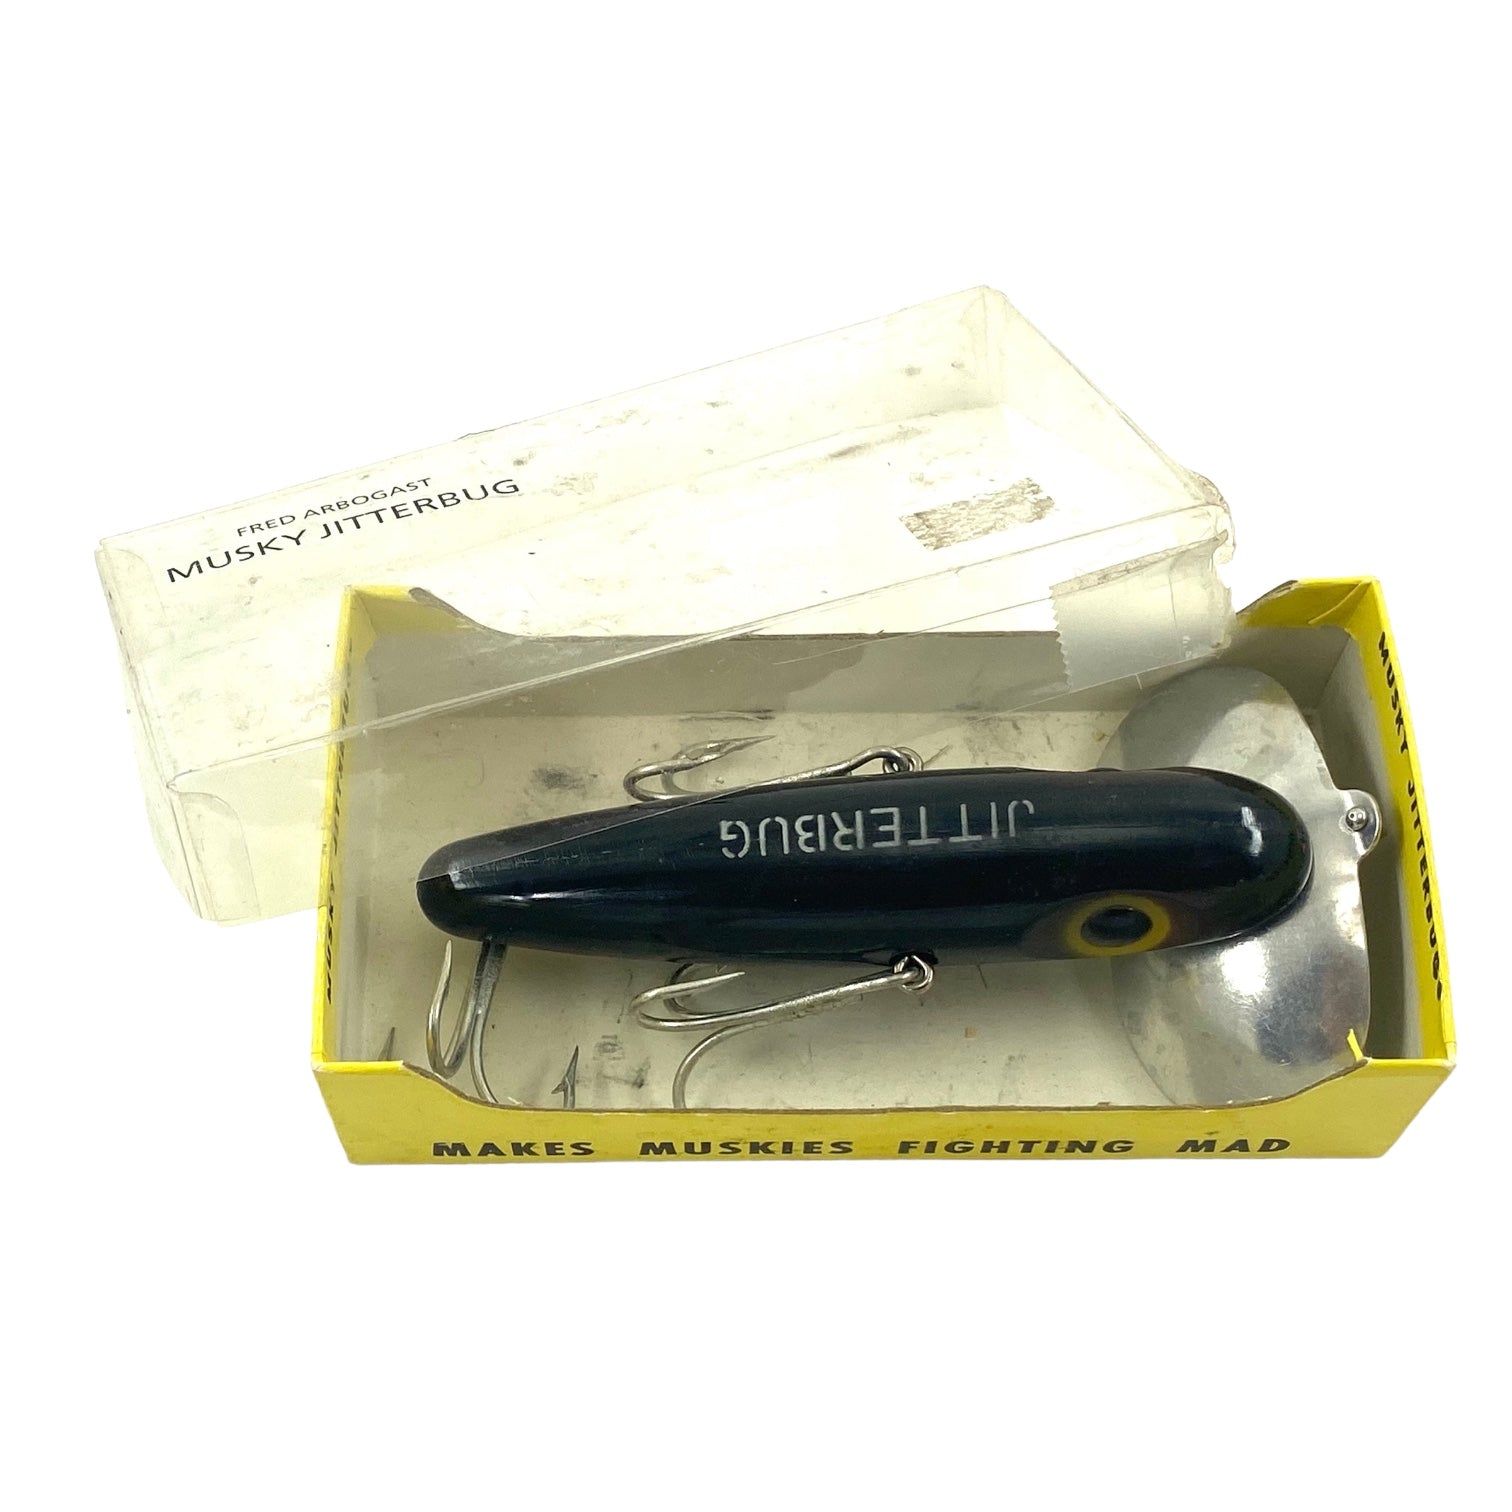 FRED ARBOGAST MUSKY SIZE JITTERBUG Fishing Lure in Original Box